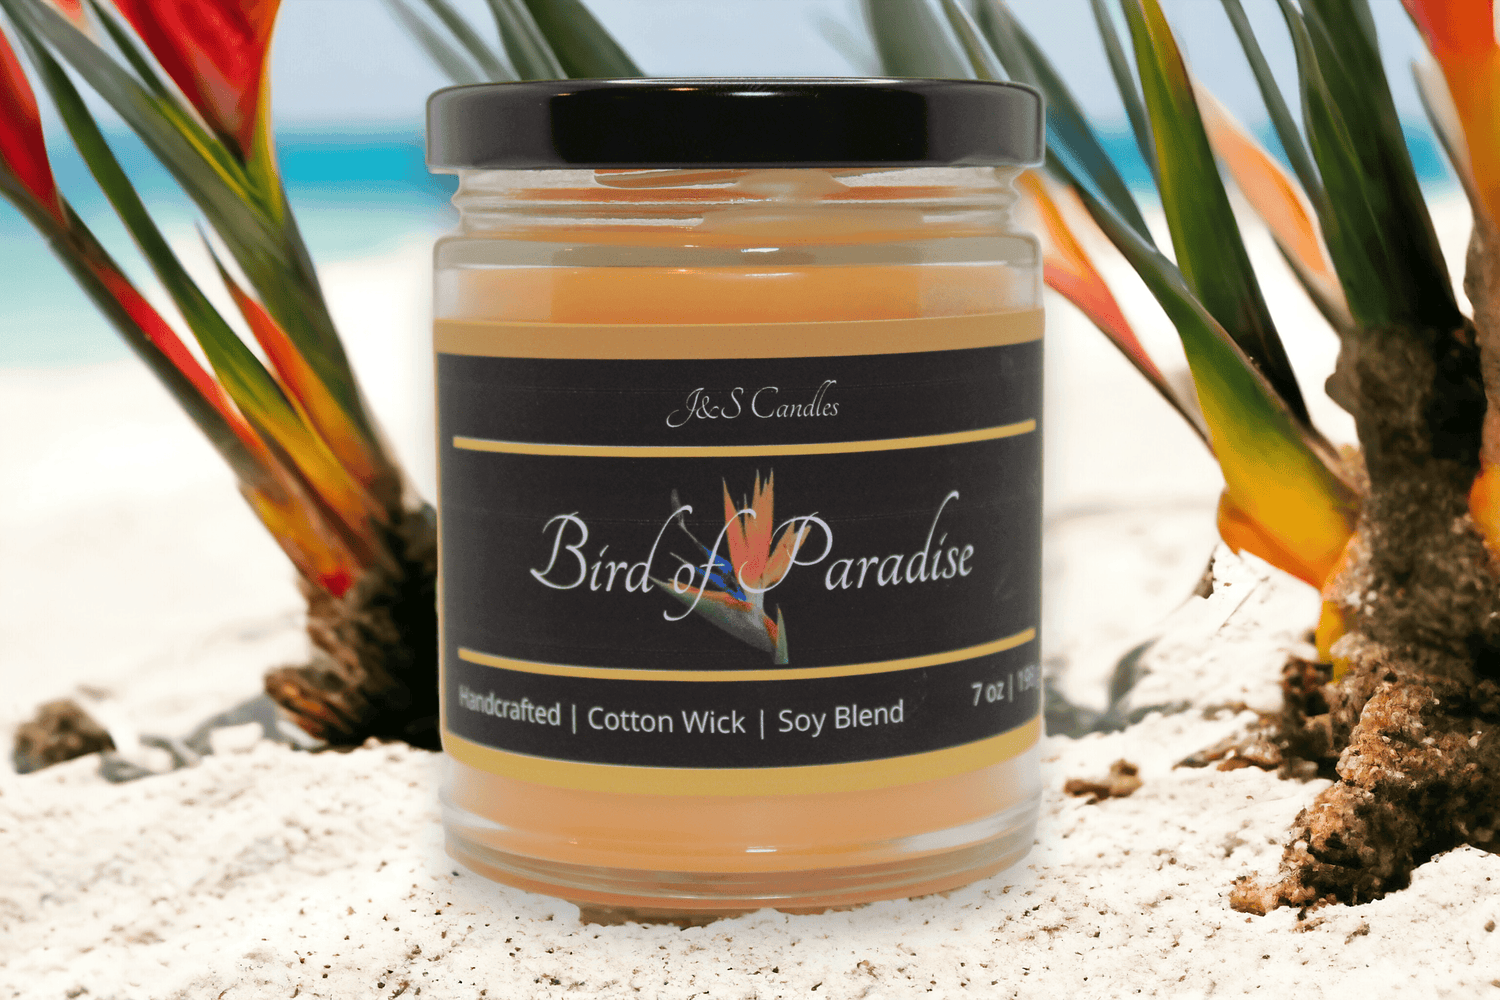 Bird of Paradise Candle - J&S Candles